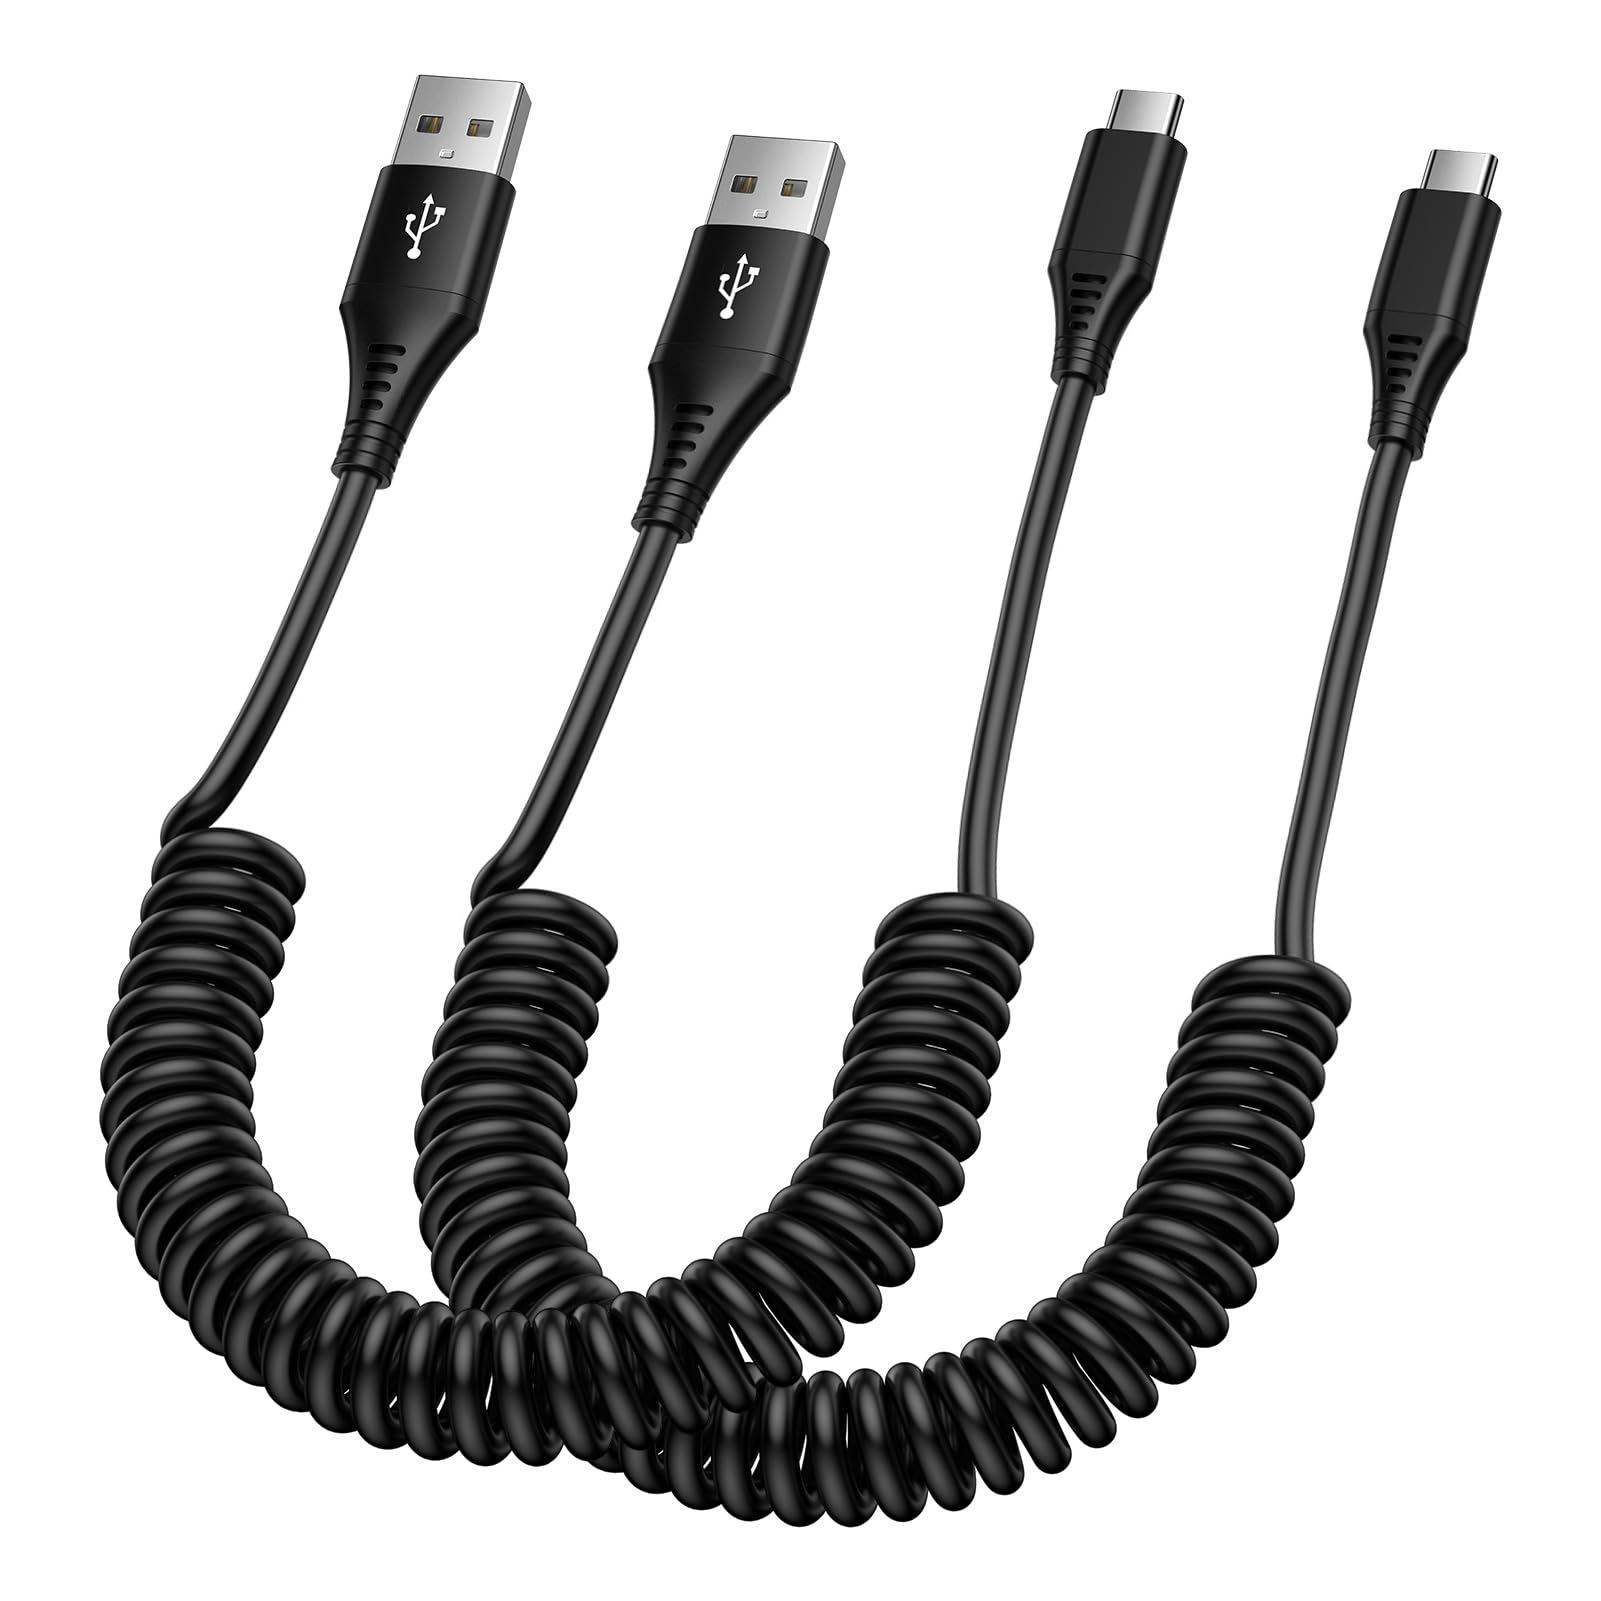 USB cable tangled in knots